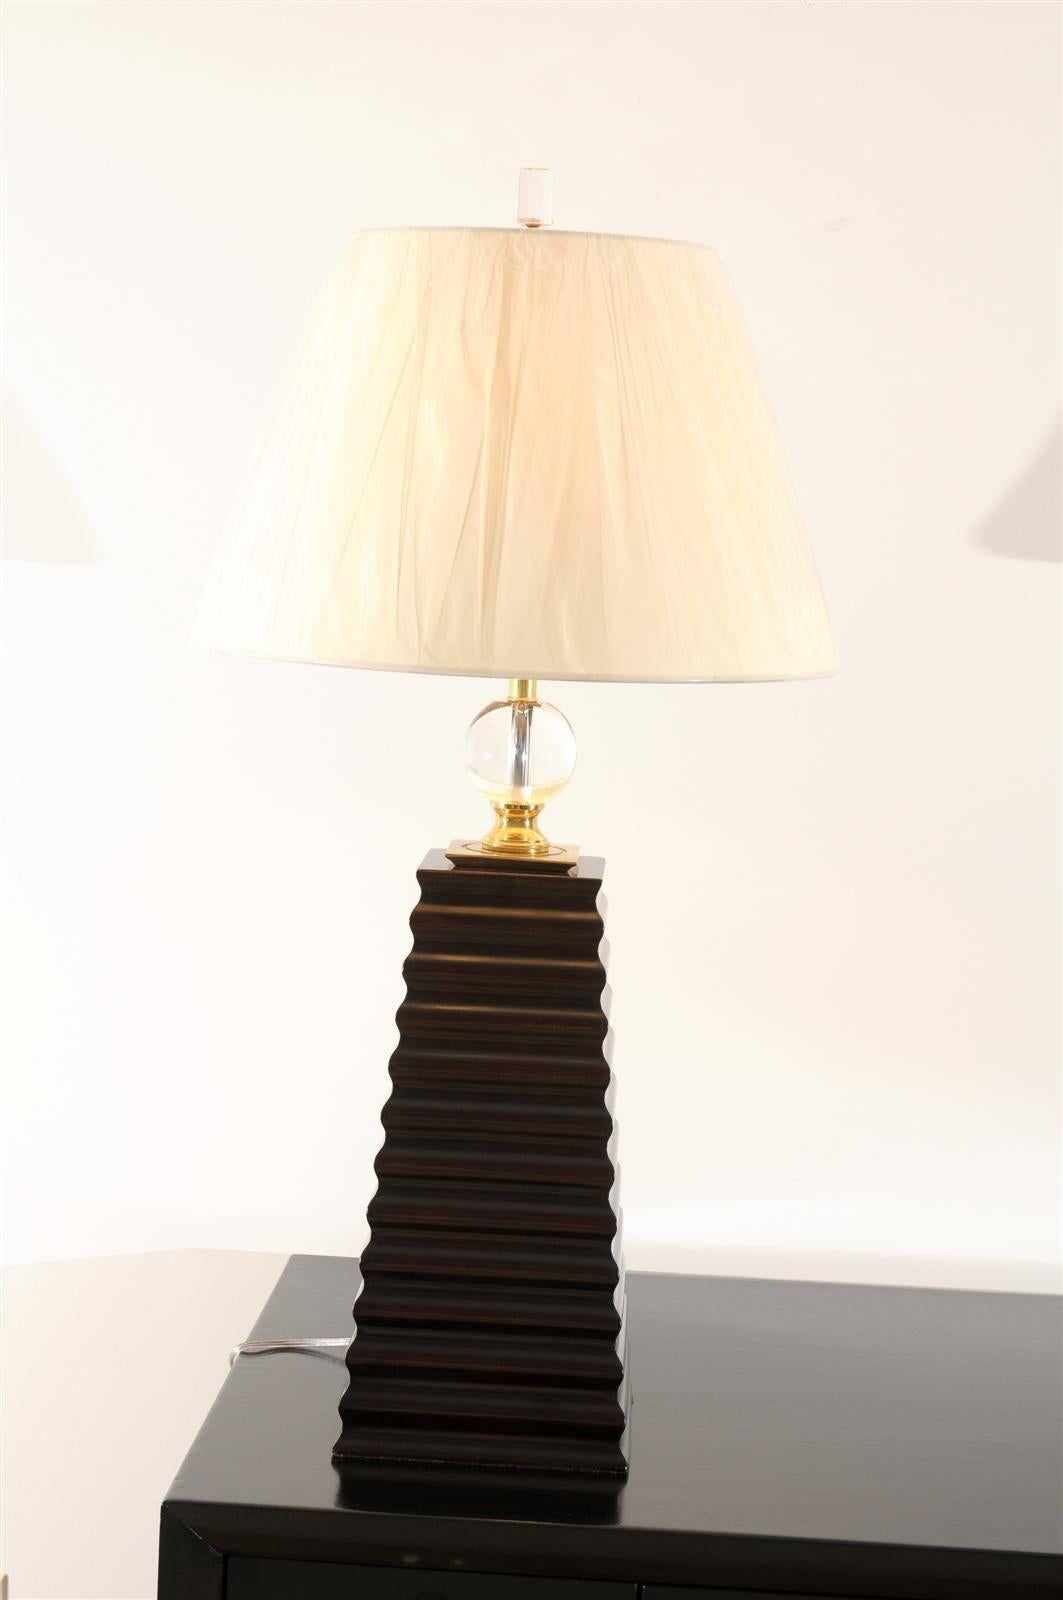 A spectacular pair of large-scale carved wood Obelisk lamps, circa 1980s. Heavy, solid wood form finished in Espresso lacquer with solid brass and crystal accents. Beautifully made pieces with style and detail. Exceptional jewelry for any room!